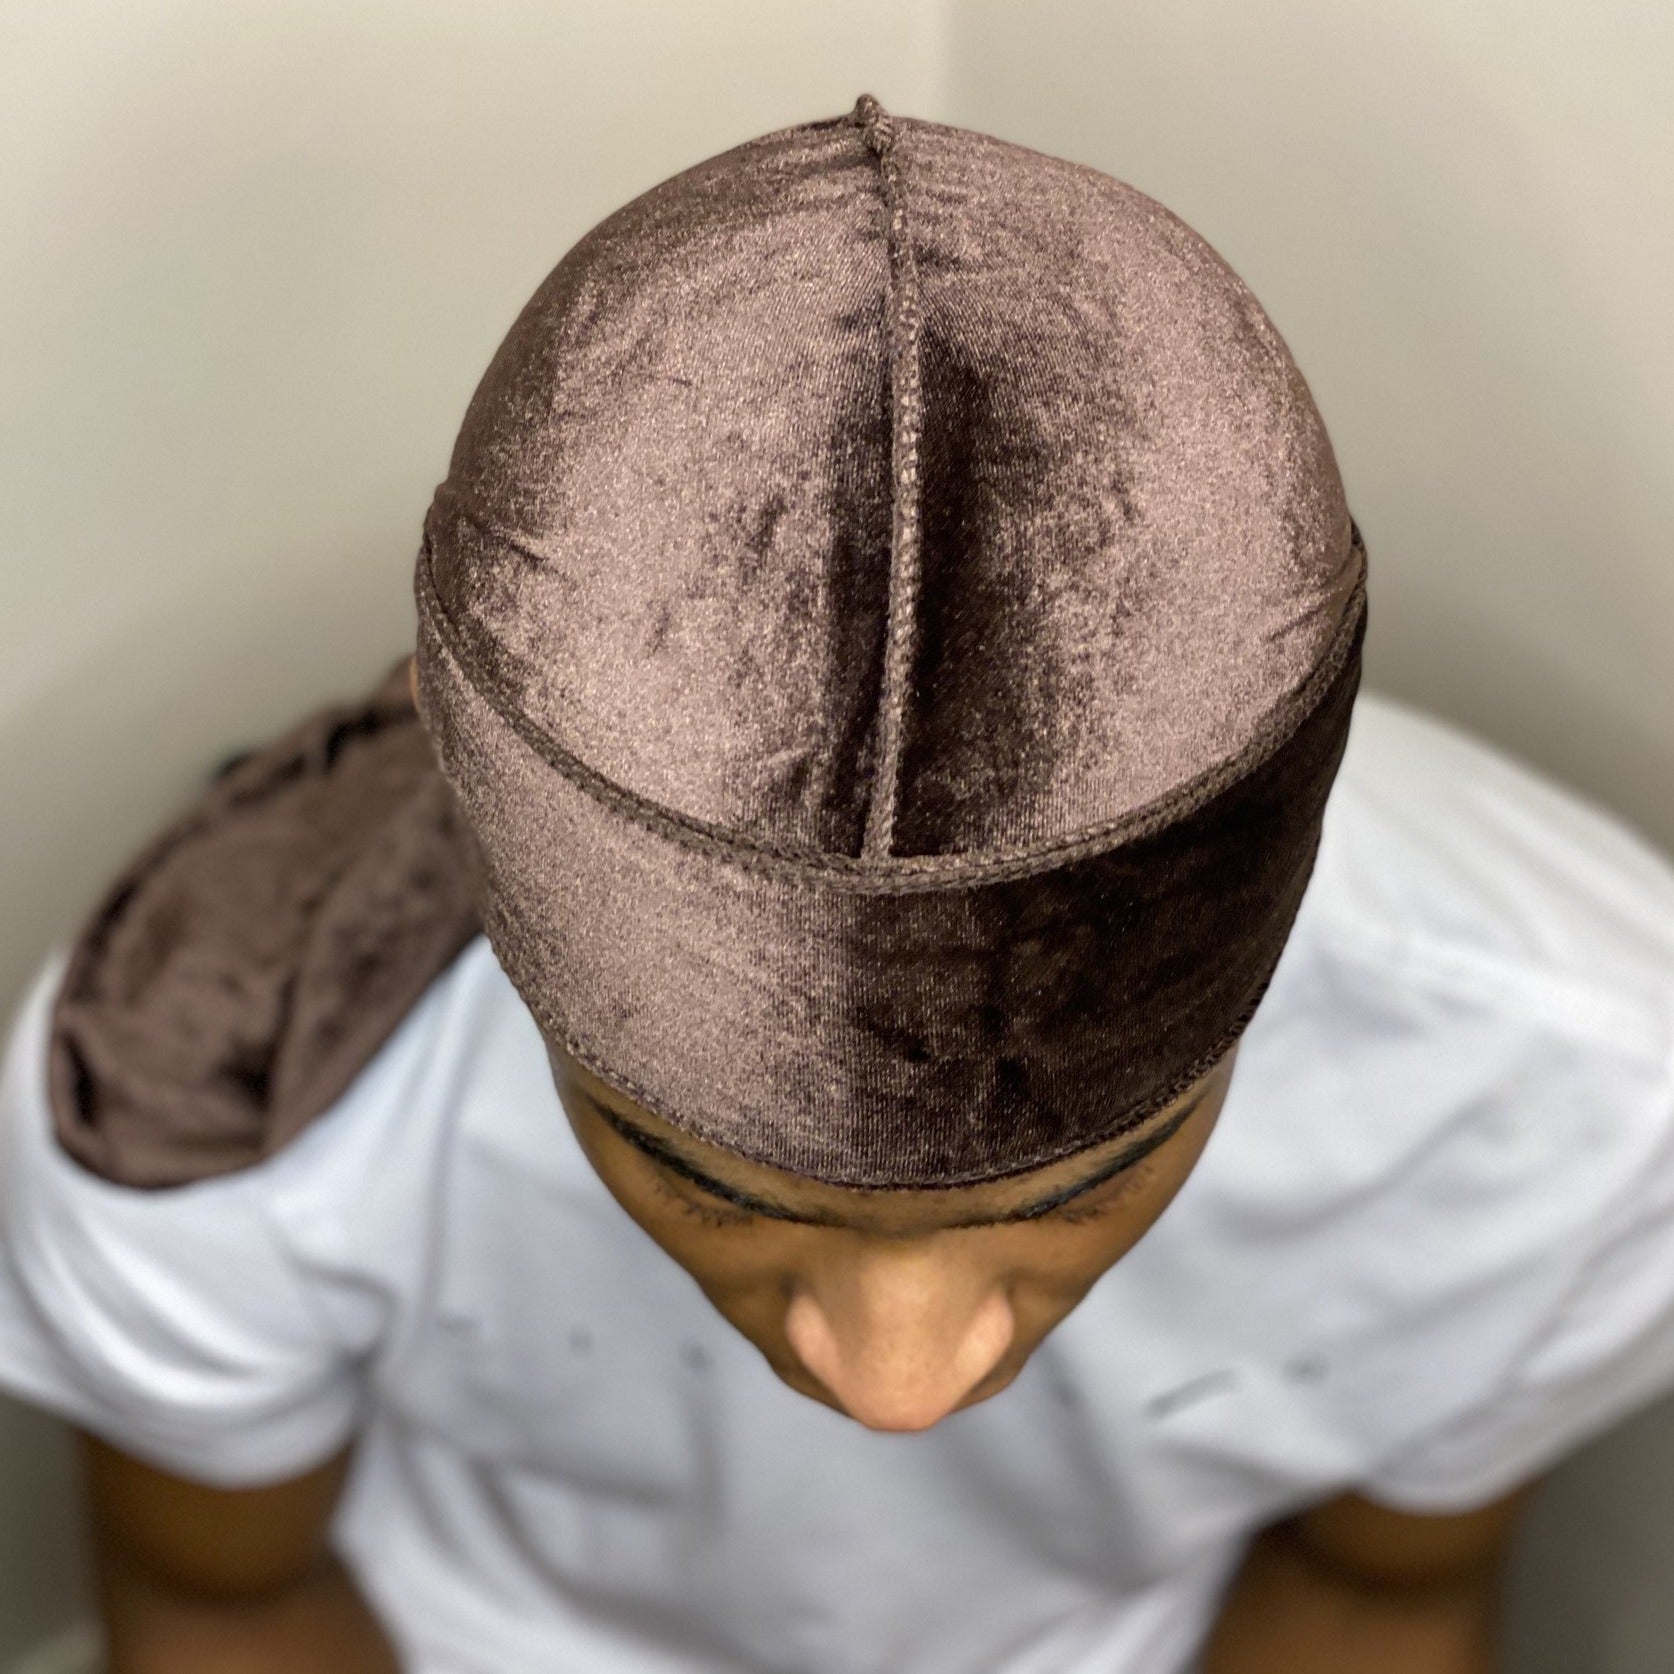 Red And White LV Designer Durag *KIDS ONLY* – Taelor Boutique